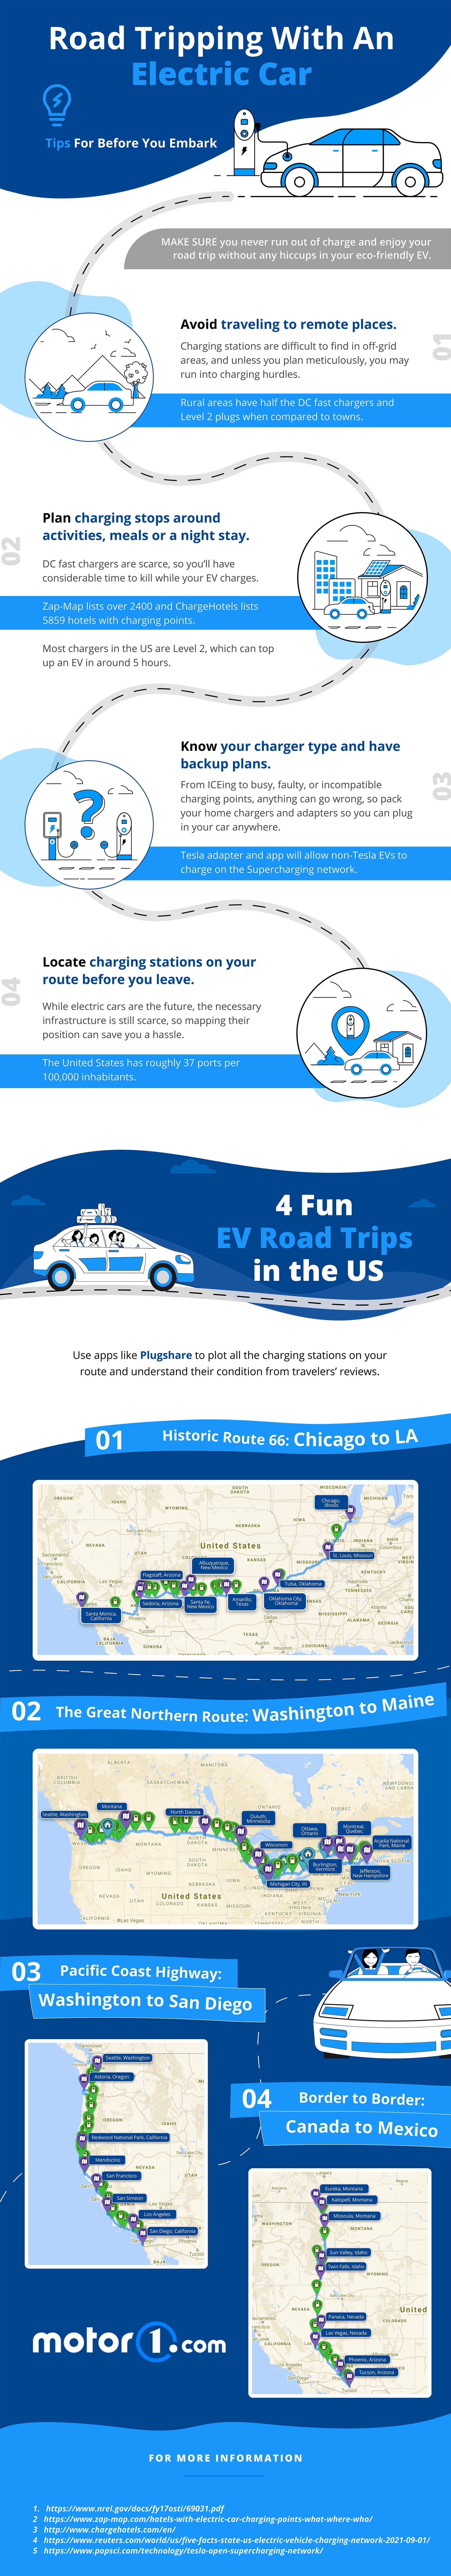 Infographic: Road Tripping with an Electric Car (EV)